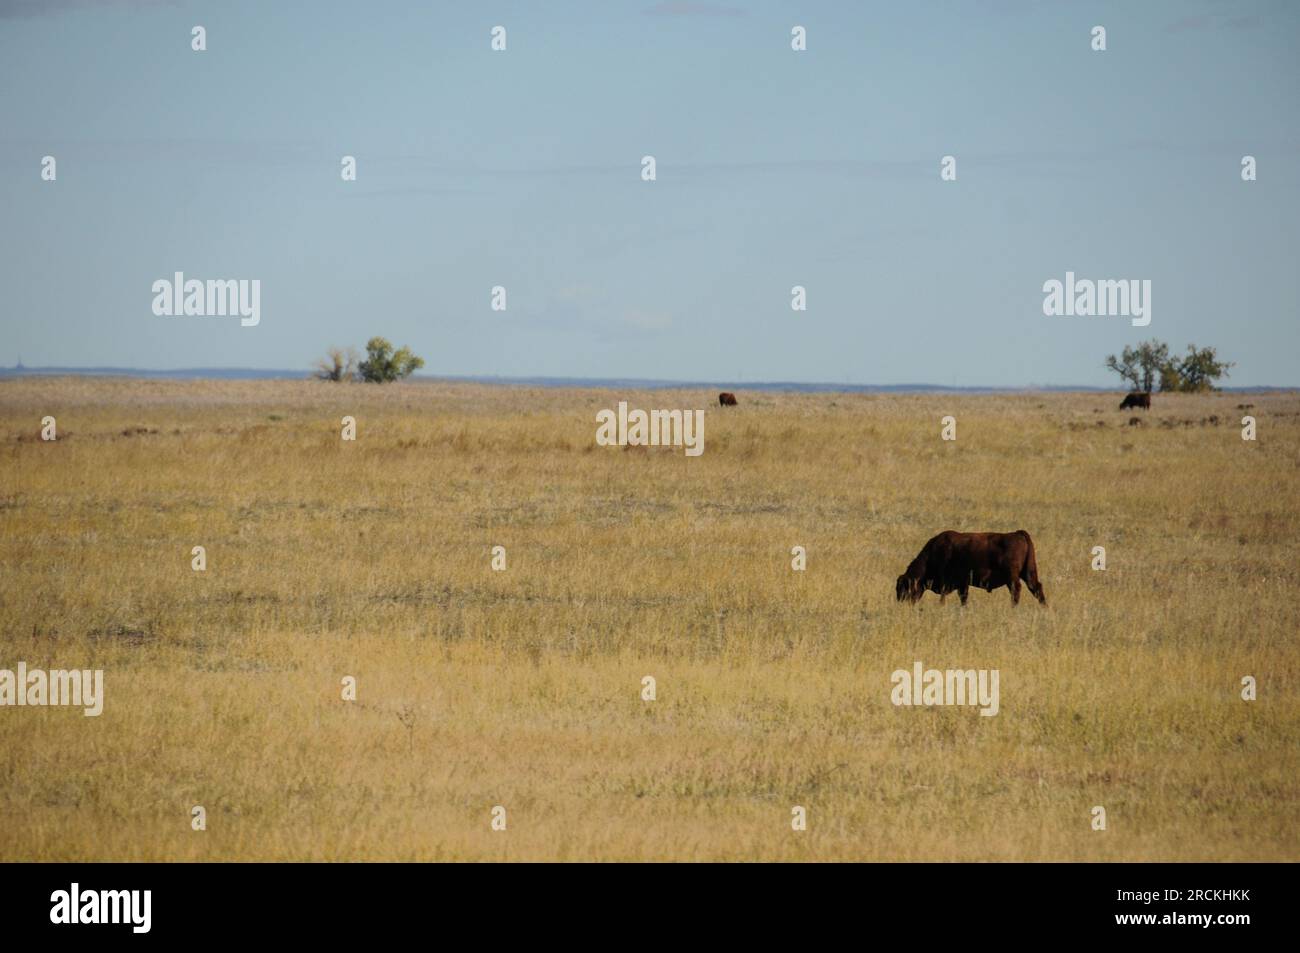 Grazing cow on a free range cattle ranch in the prairies of eastern Colorado, USA Stock Photo